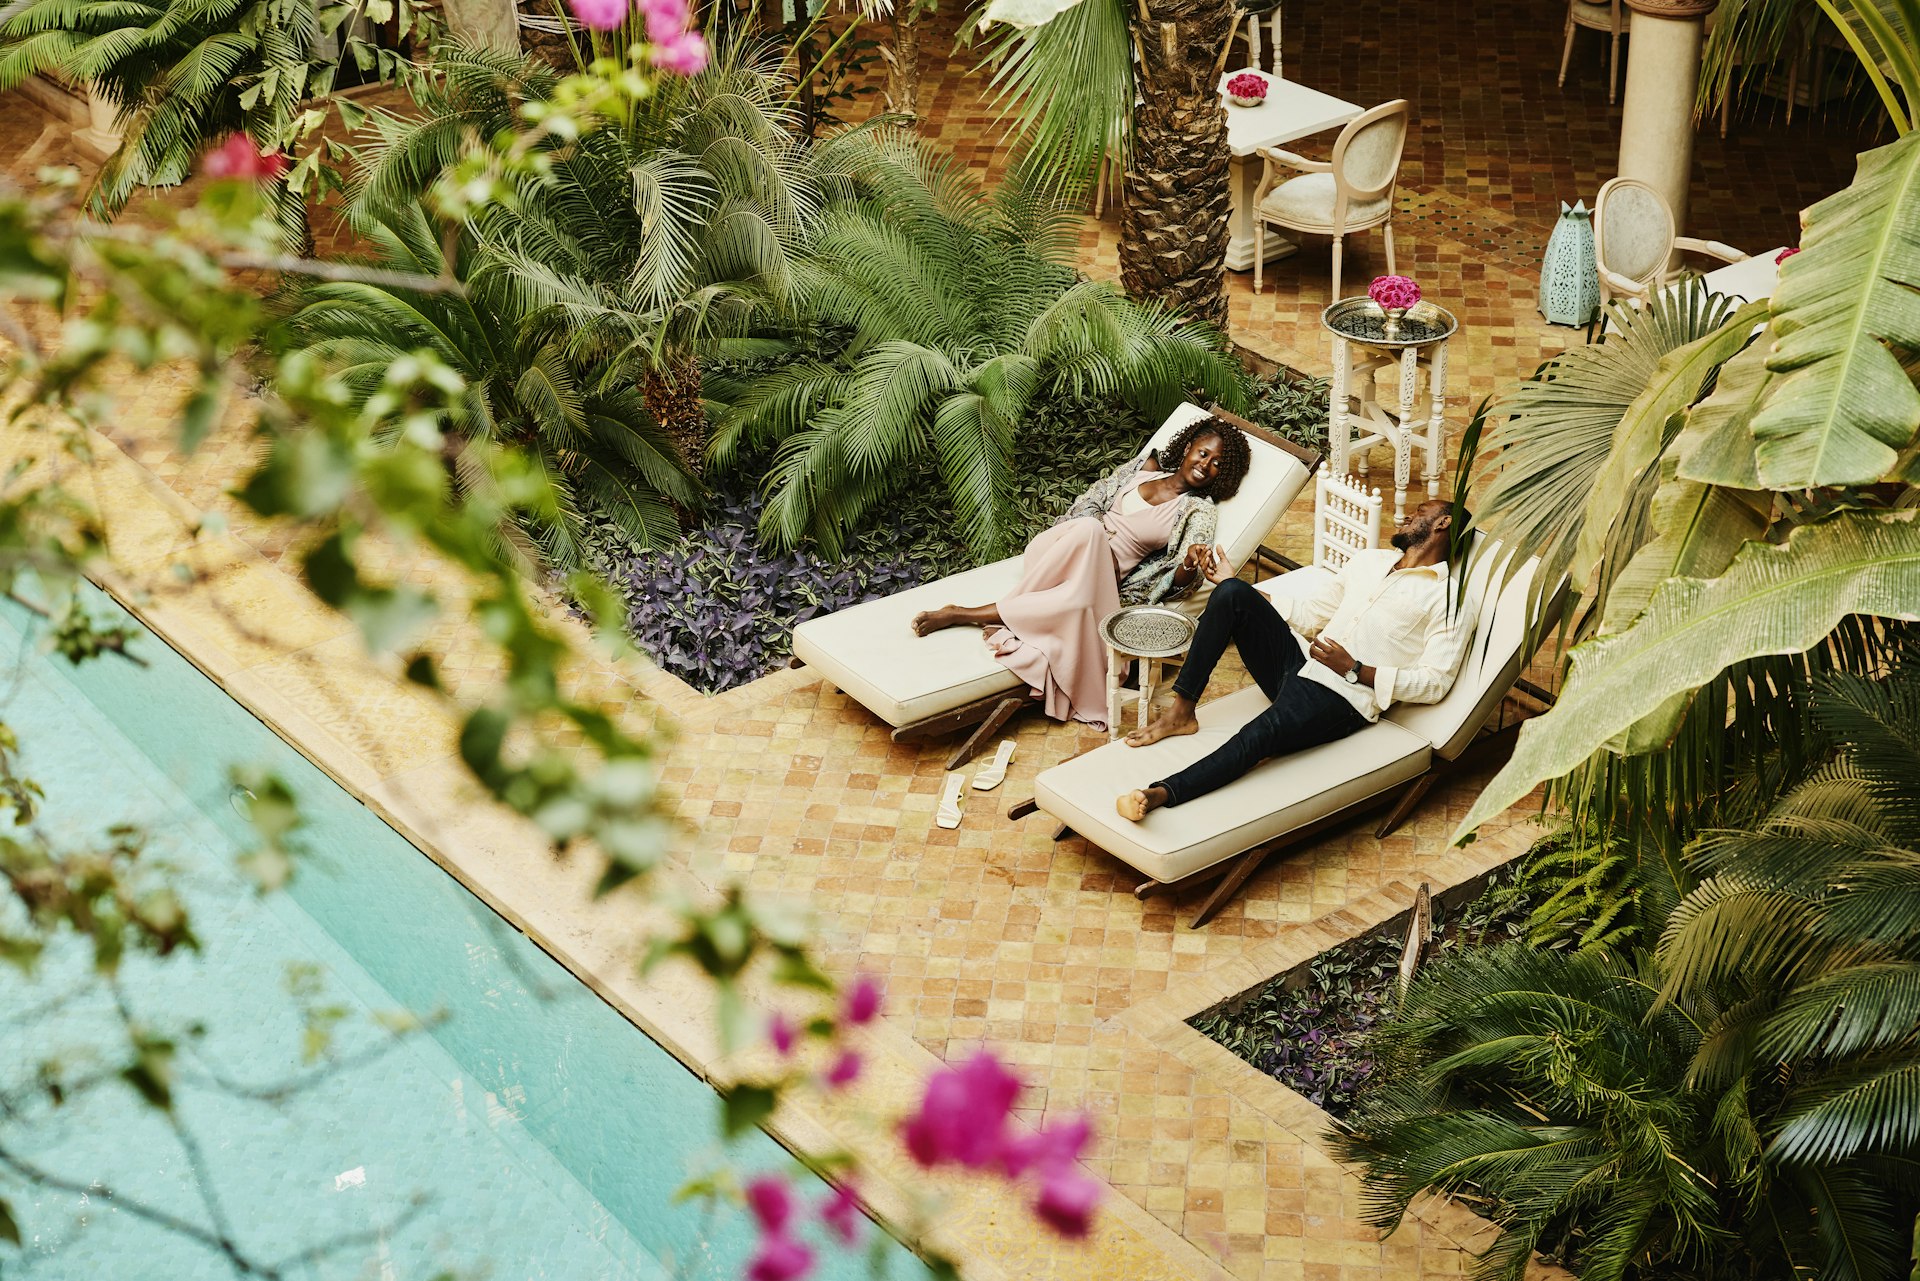 Overhead view of a couple on loungers next to a pool in a riad courtyard